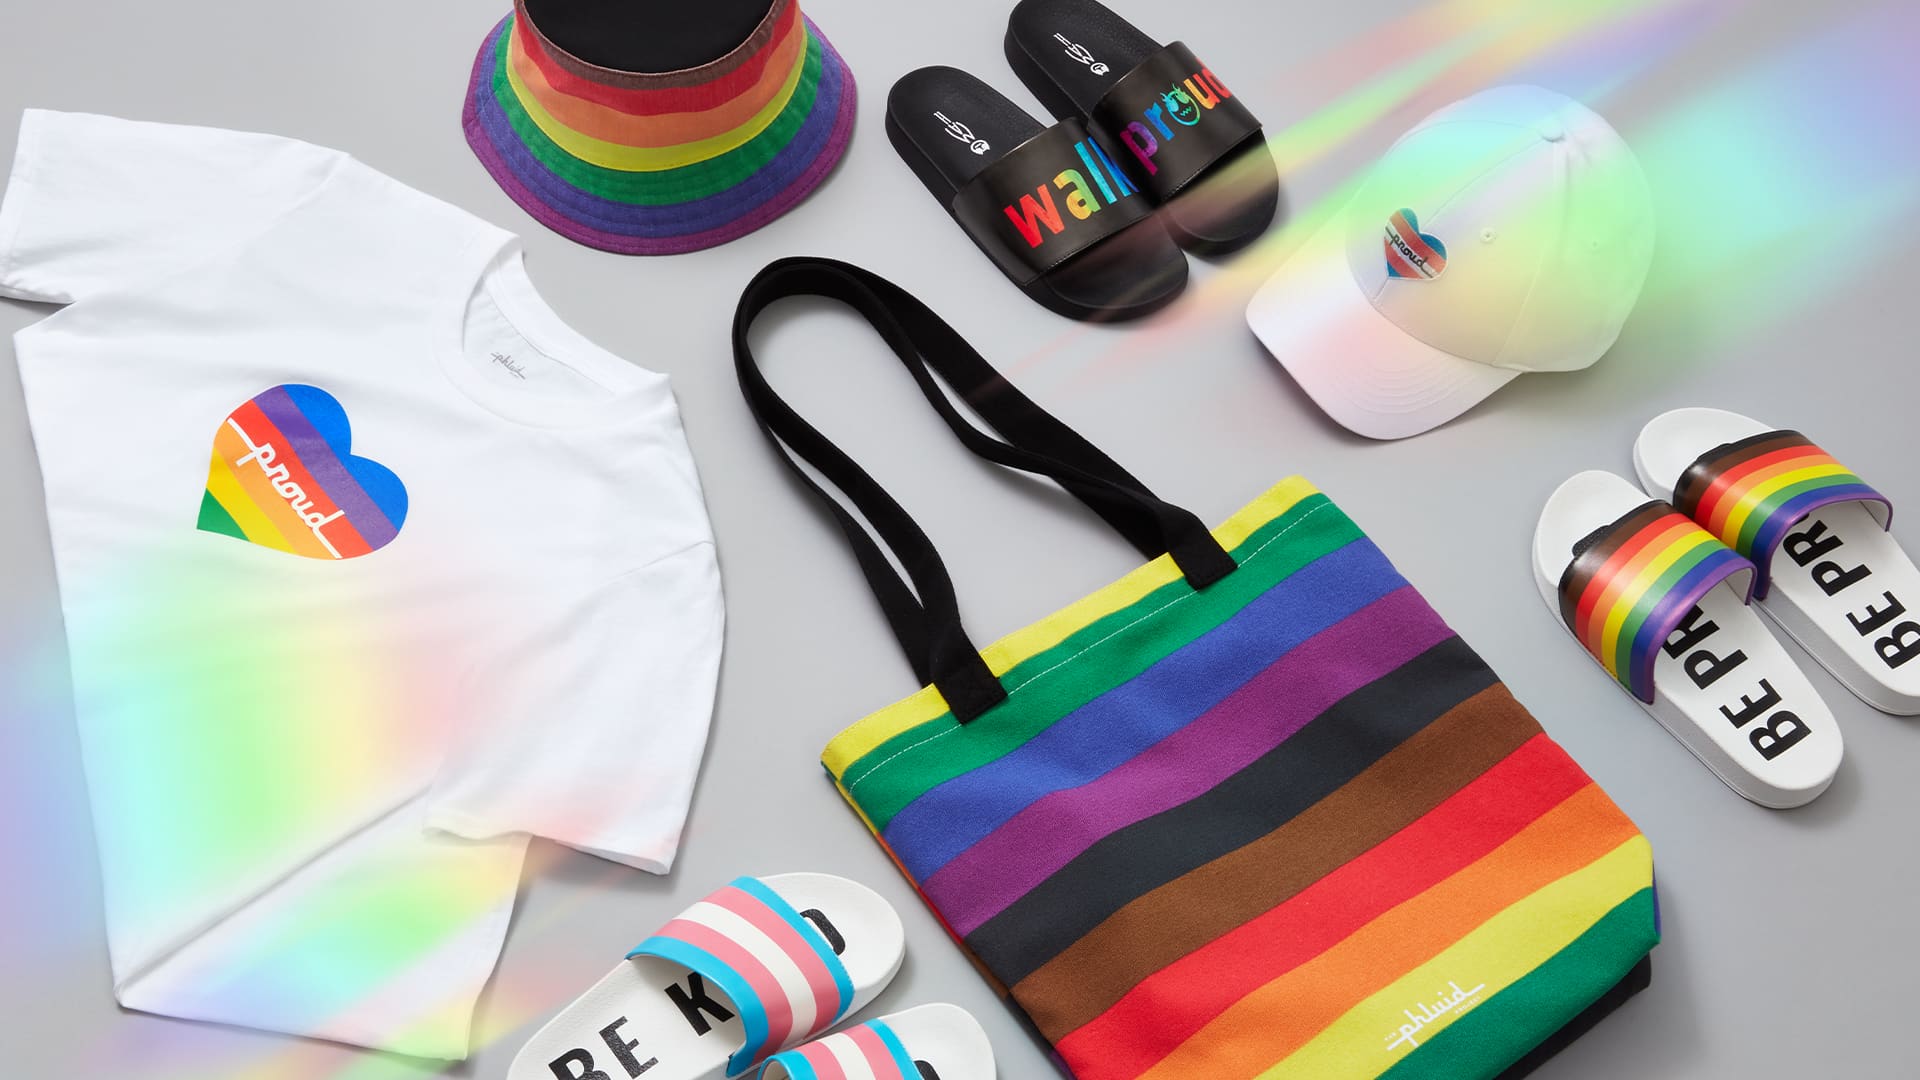 The off-price retailer Saks Off Fifth has teamed up with The Phluid Project to create a line of gender-fluid apparel, coinciding with Pride Month.